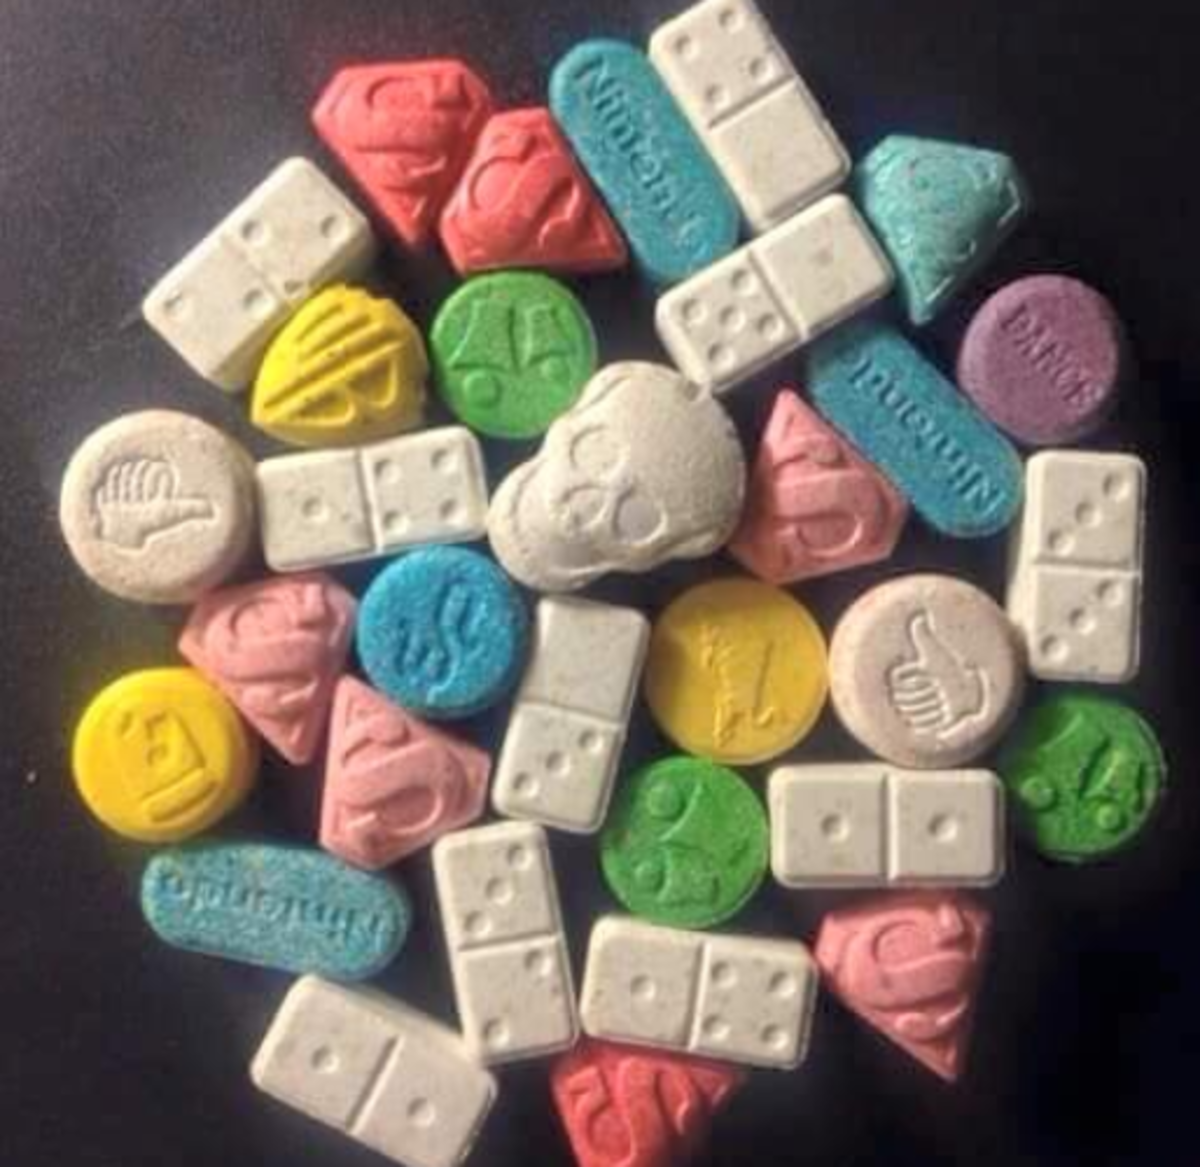 Ecstasy disguised as candy